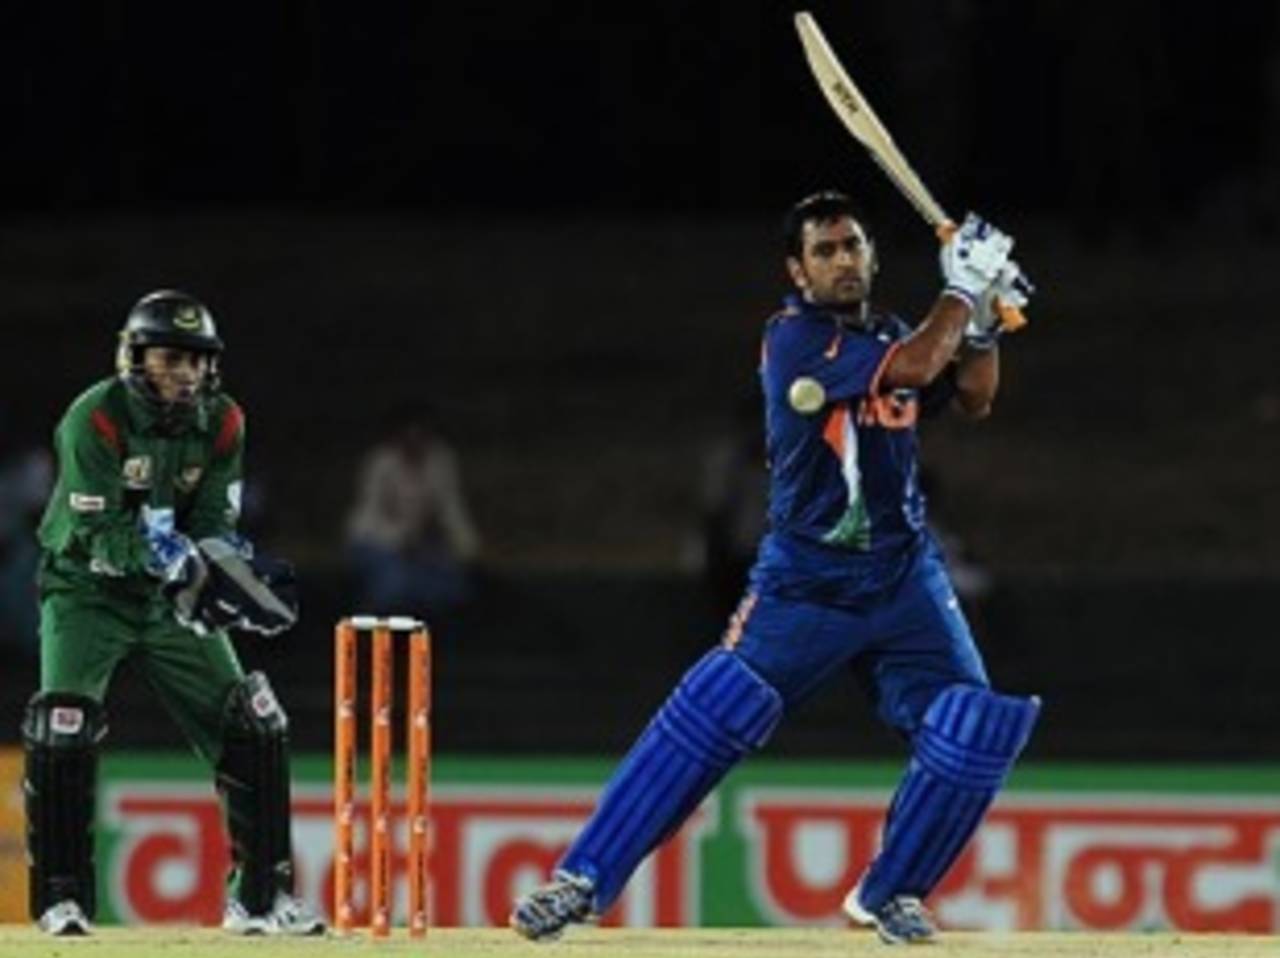 MS Dhoni hits through the off side, Bangladesh v India, 2nd ODI, Asia Cup, Dambulla, June 16, 2010